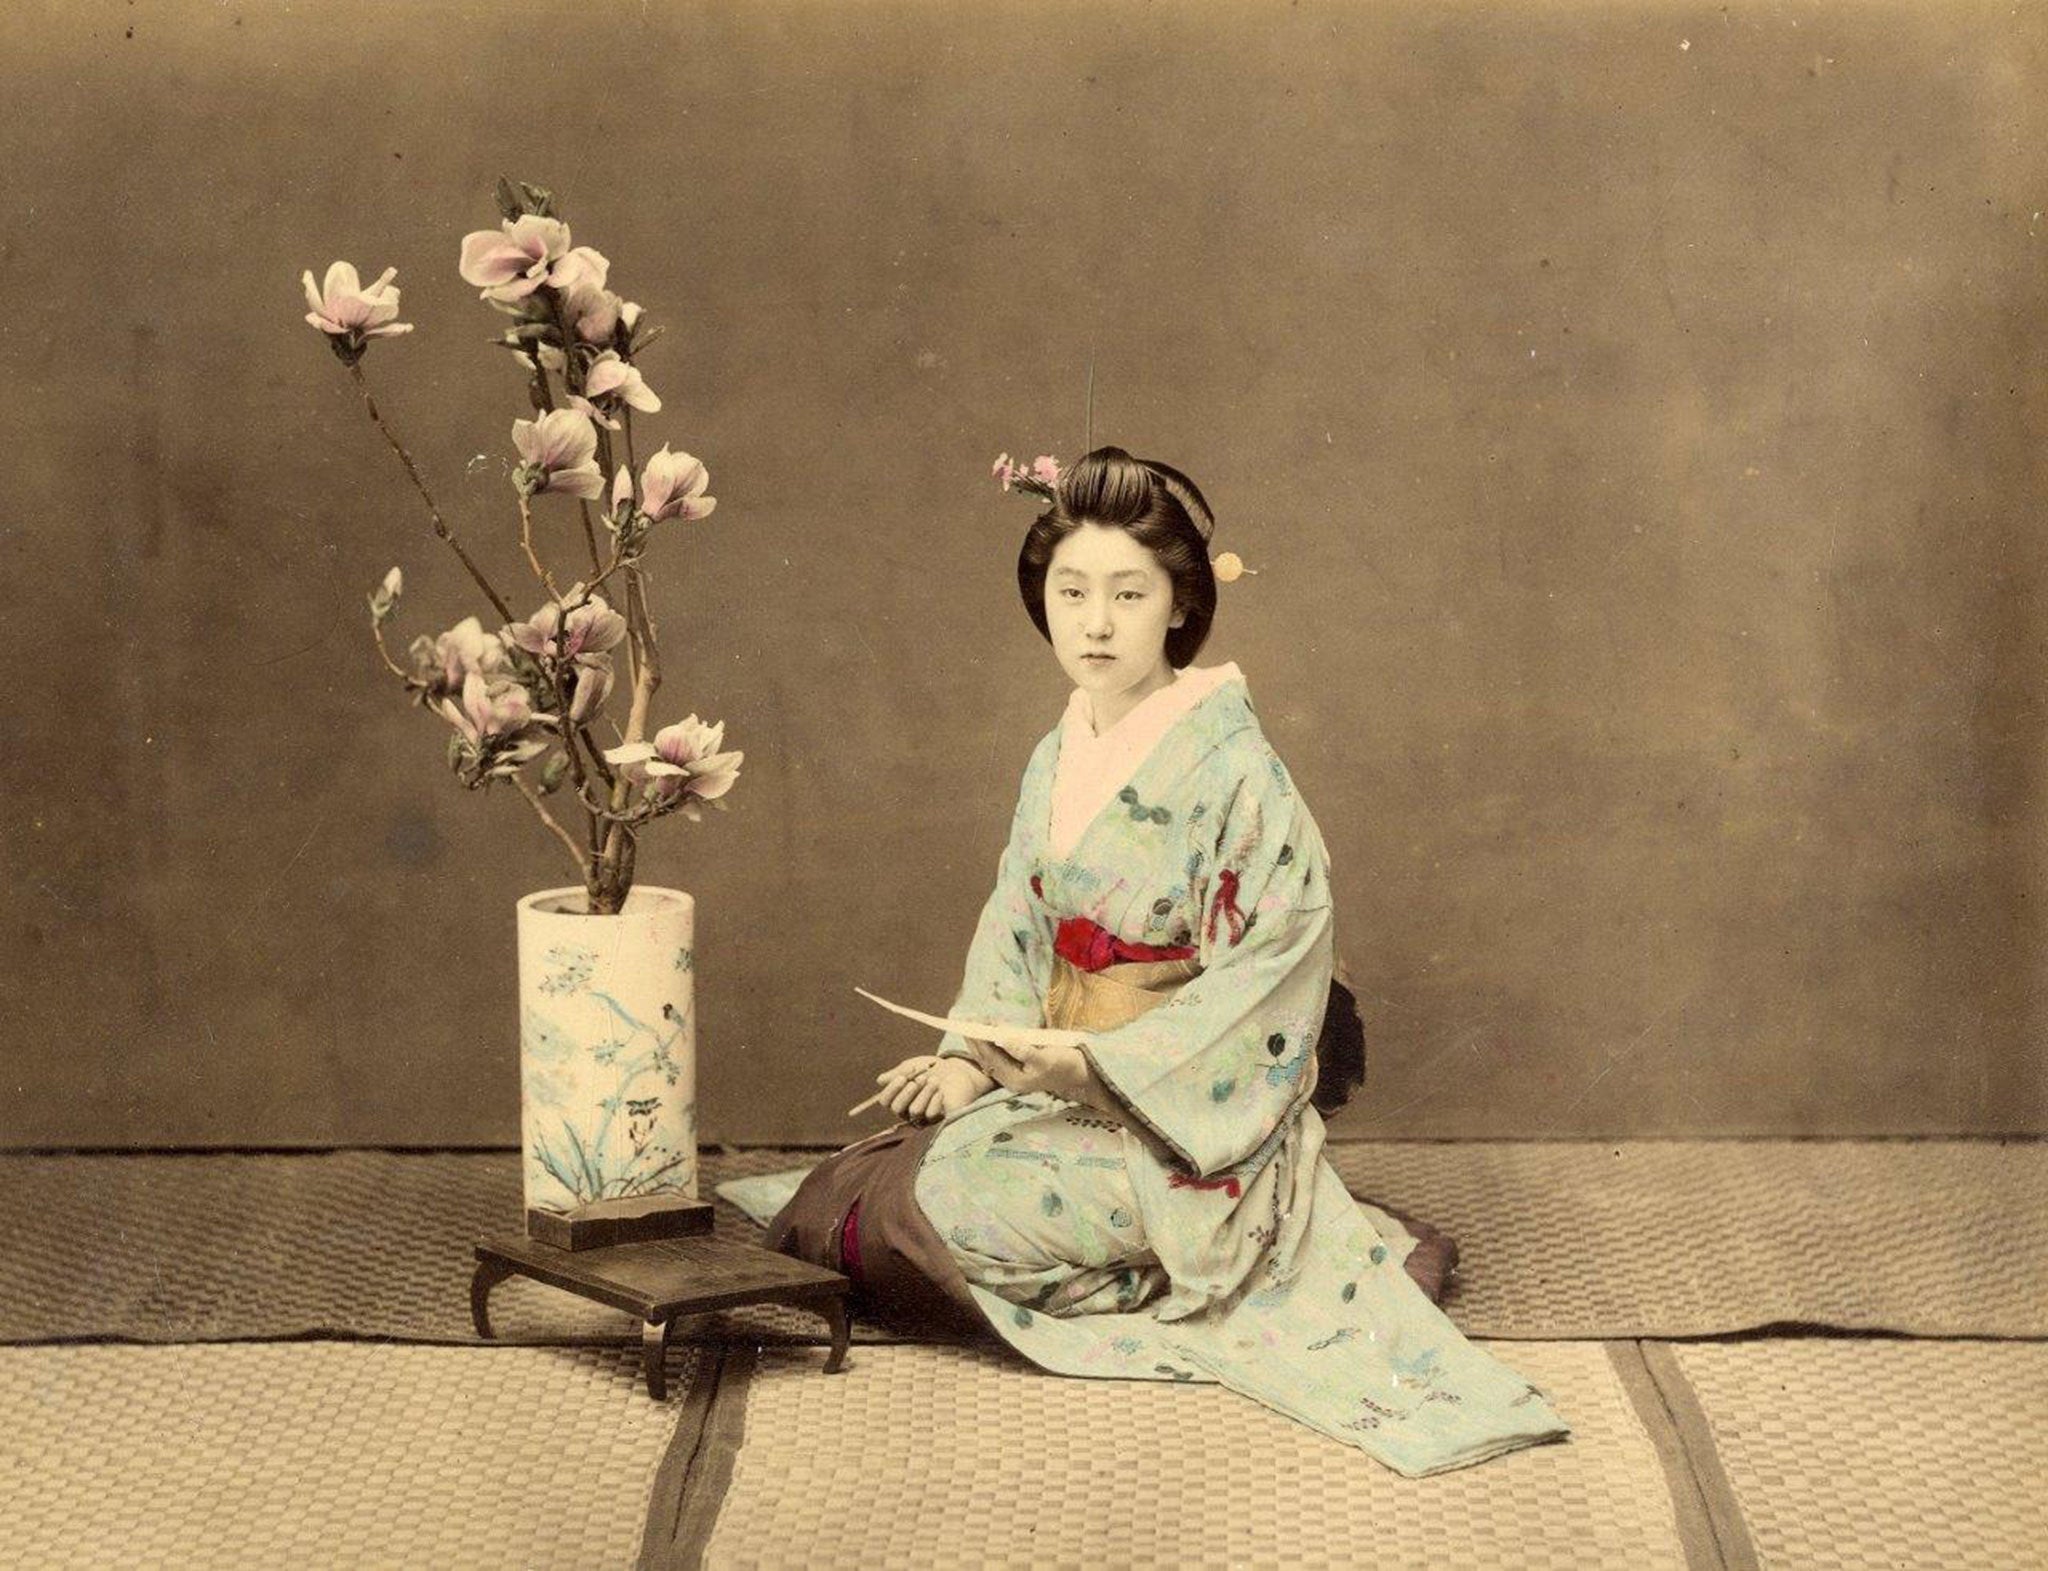 Stunning Vintage Photographs Depict Daily Life In 19th Century Japan The Independent The